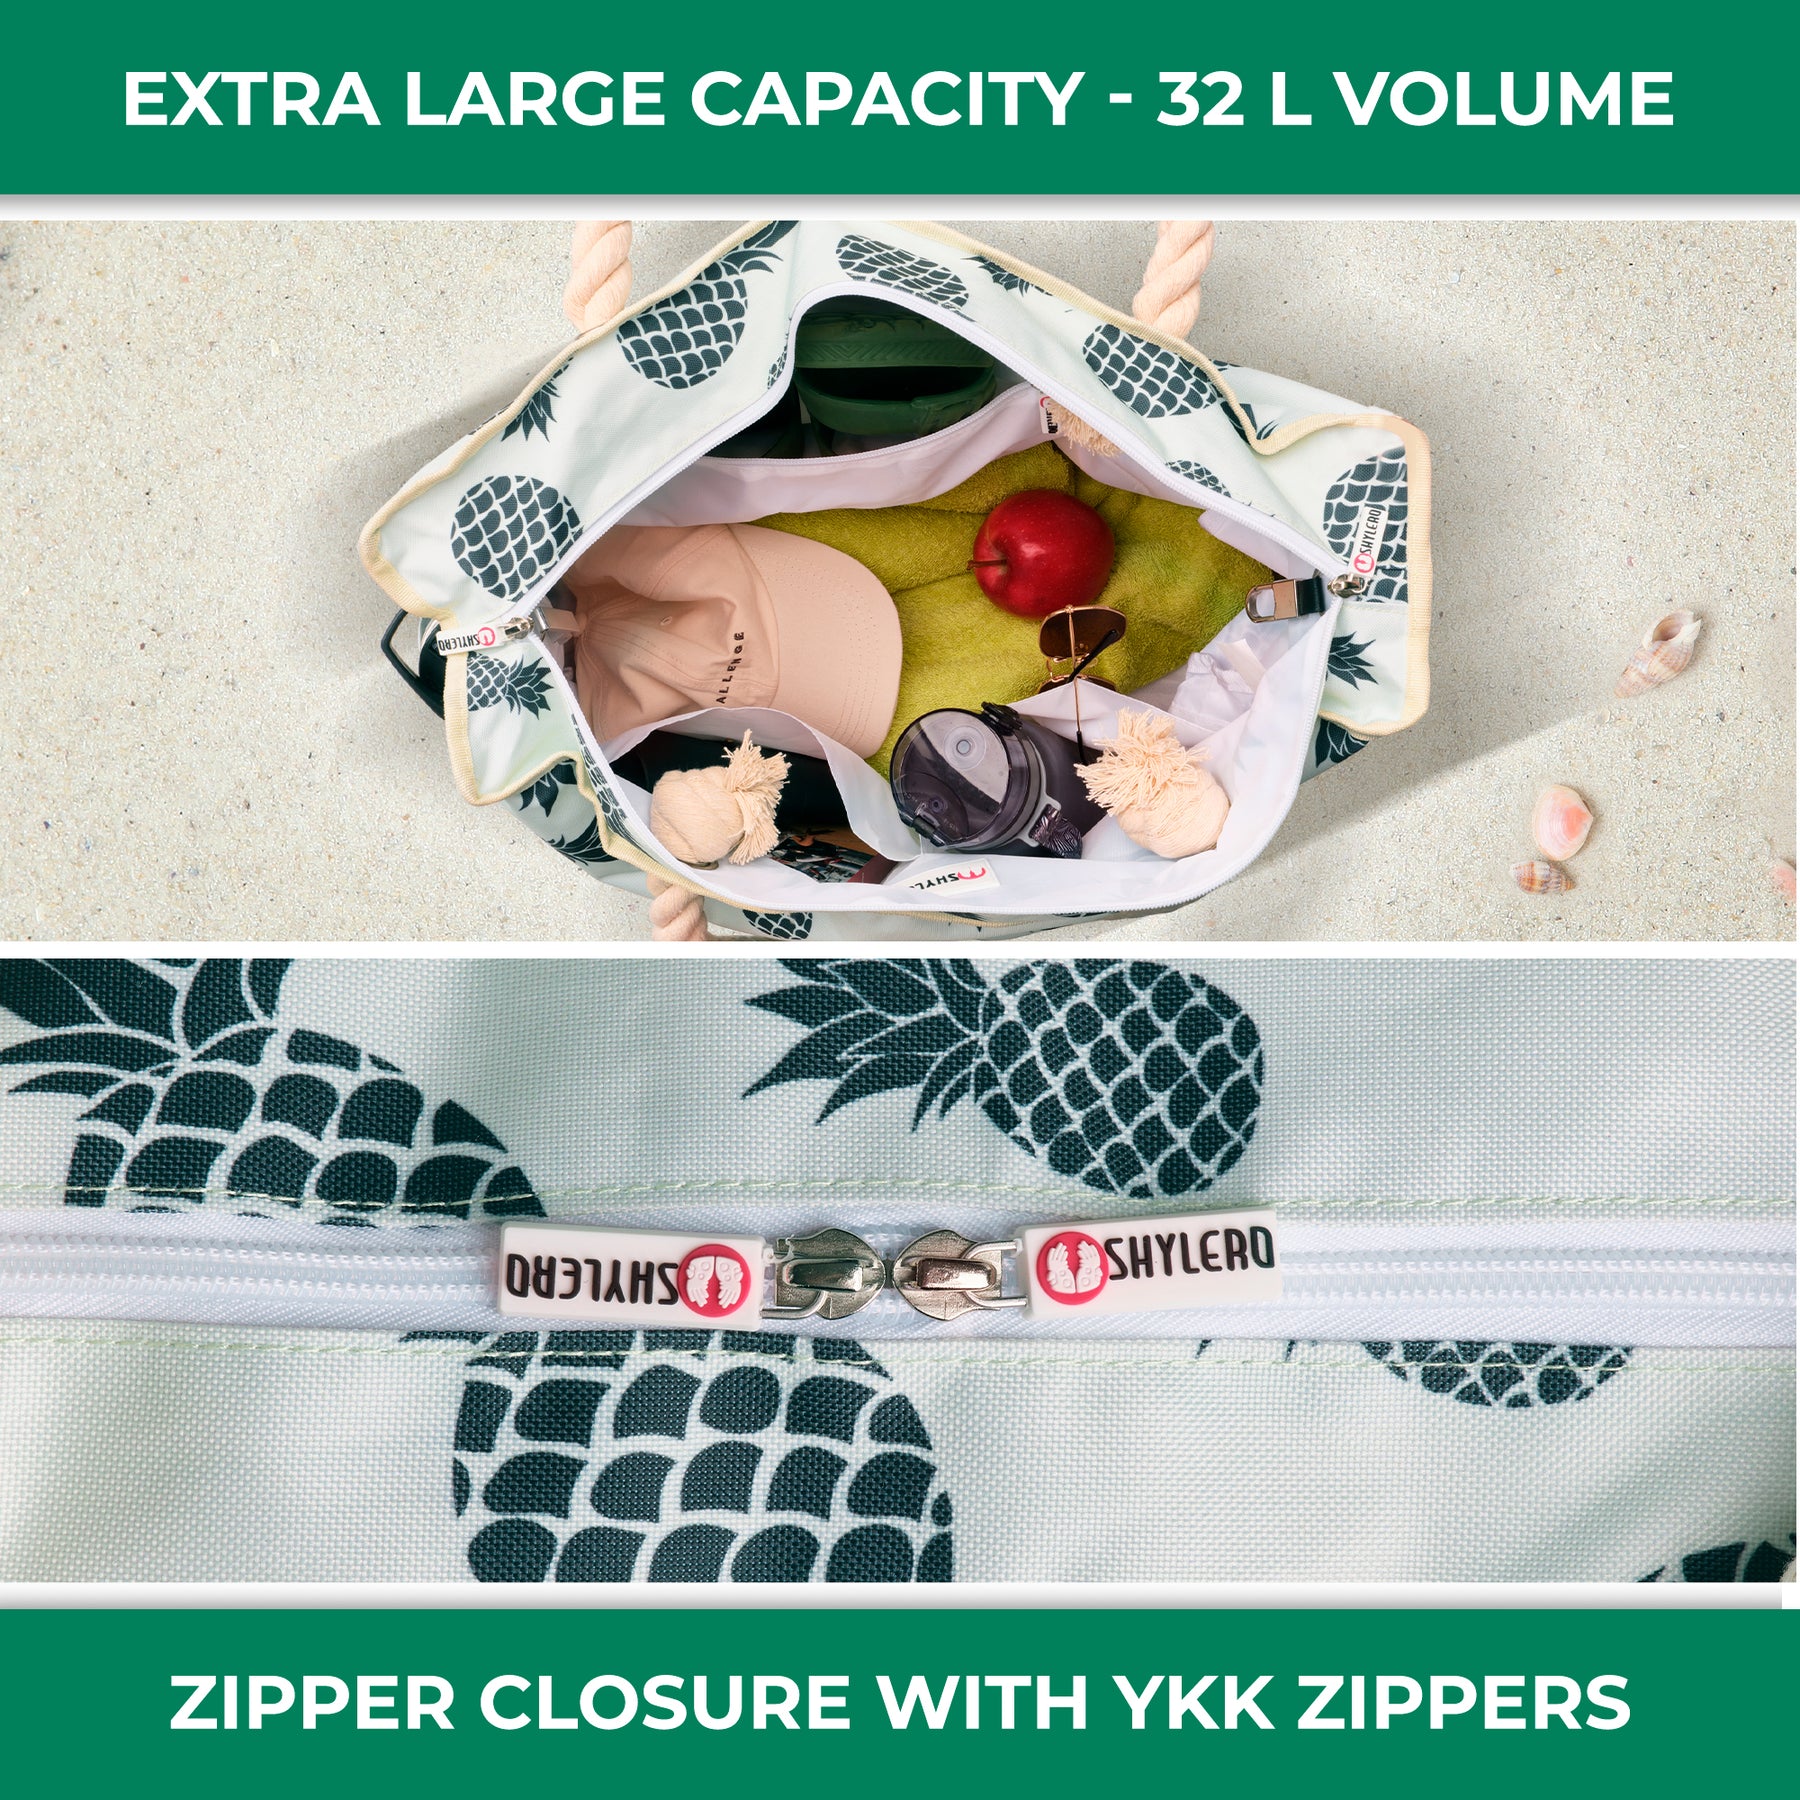 Beach Bag and Pool Bag | Water Repellent | Top YKK® Zip | Family Size | L22" x H15" x W6" | Green Pineapples